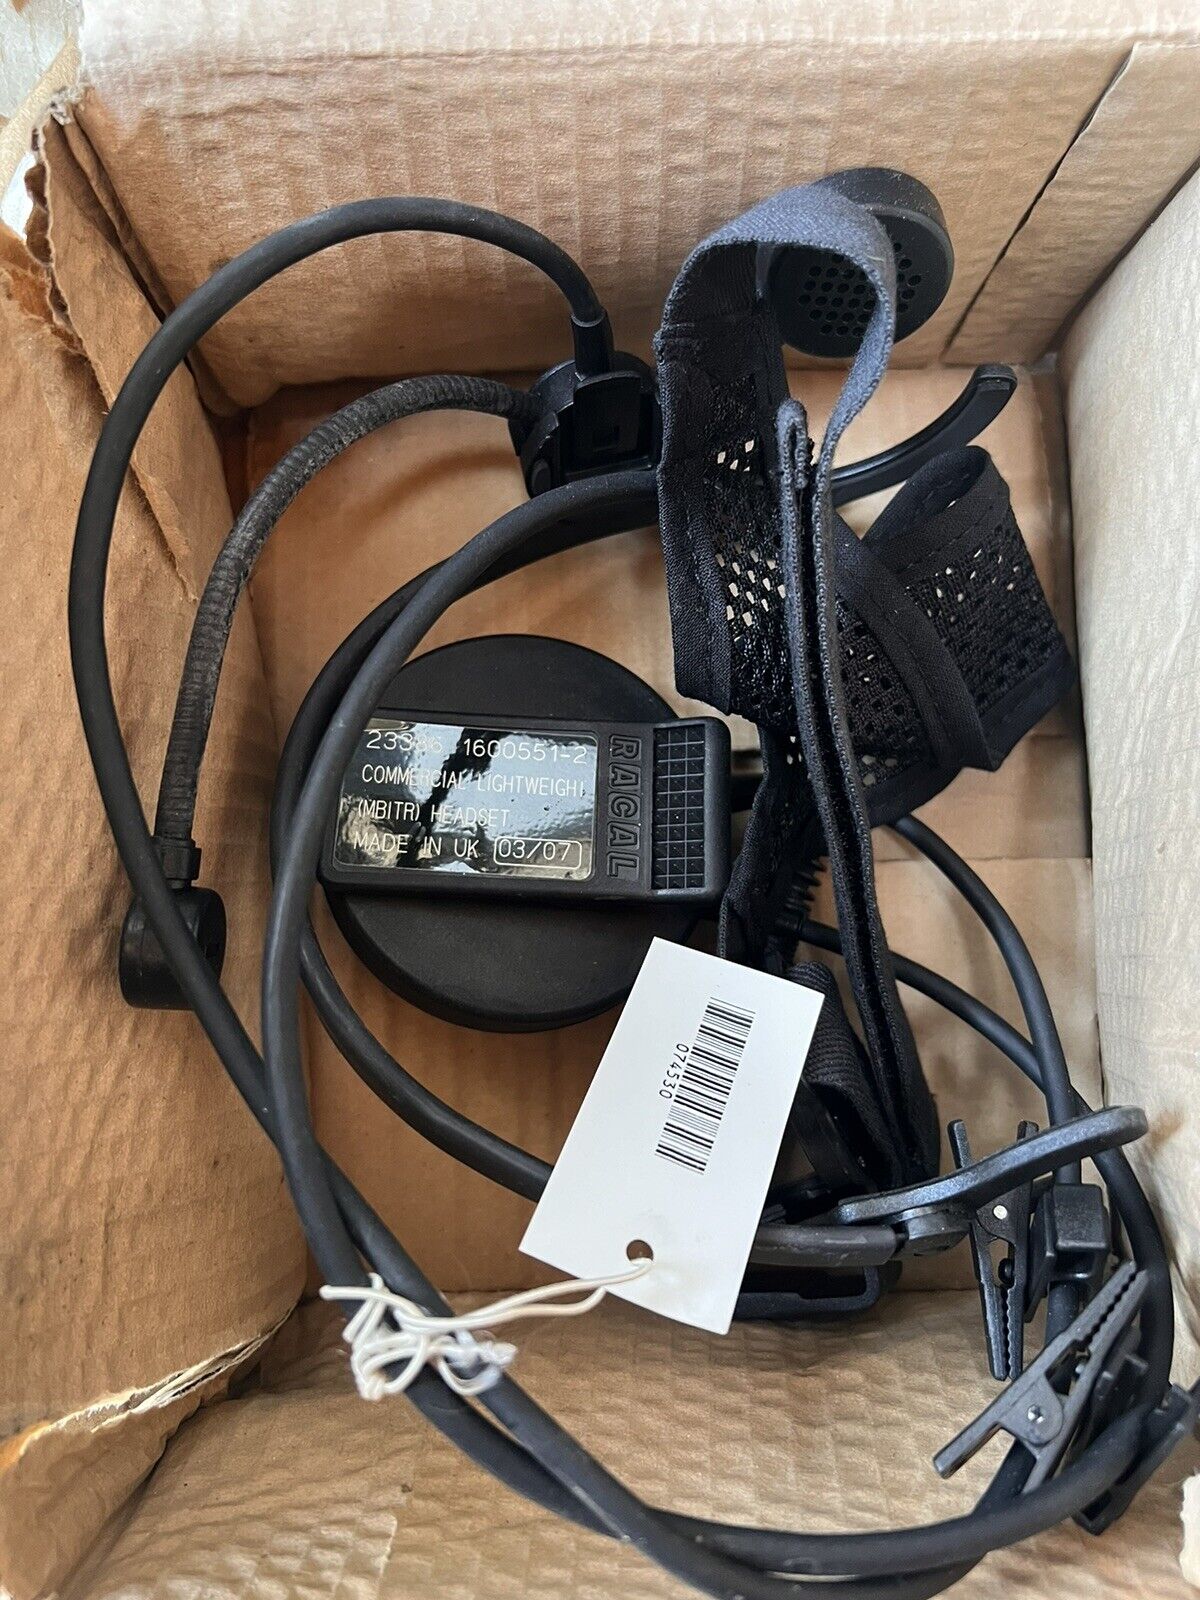 NOS THALES COMMERCIAL LIGHTWEIGHT HEADSET (MBITR) 1600551-2